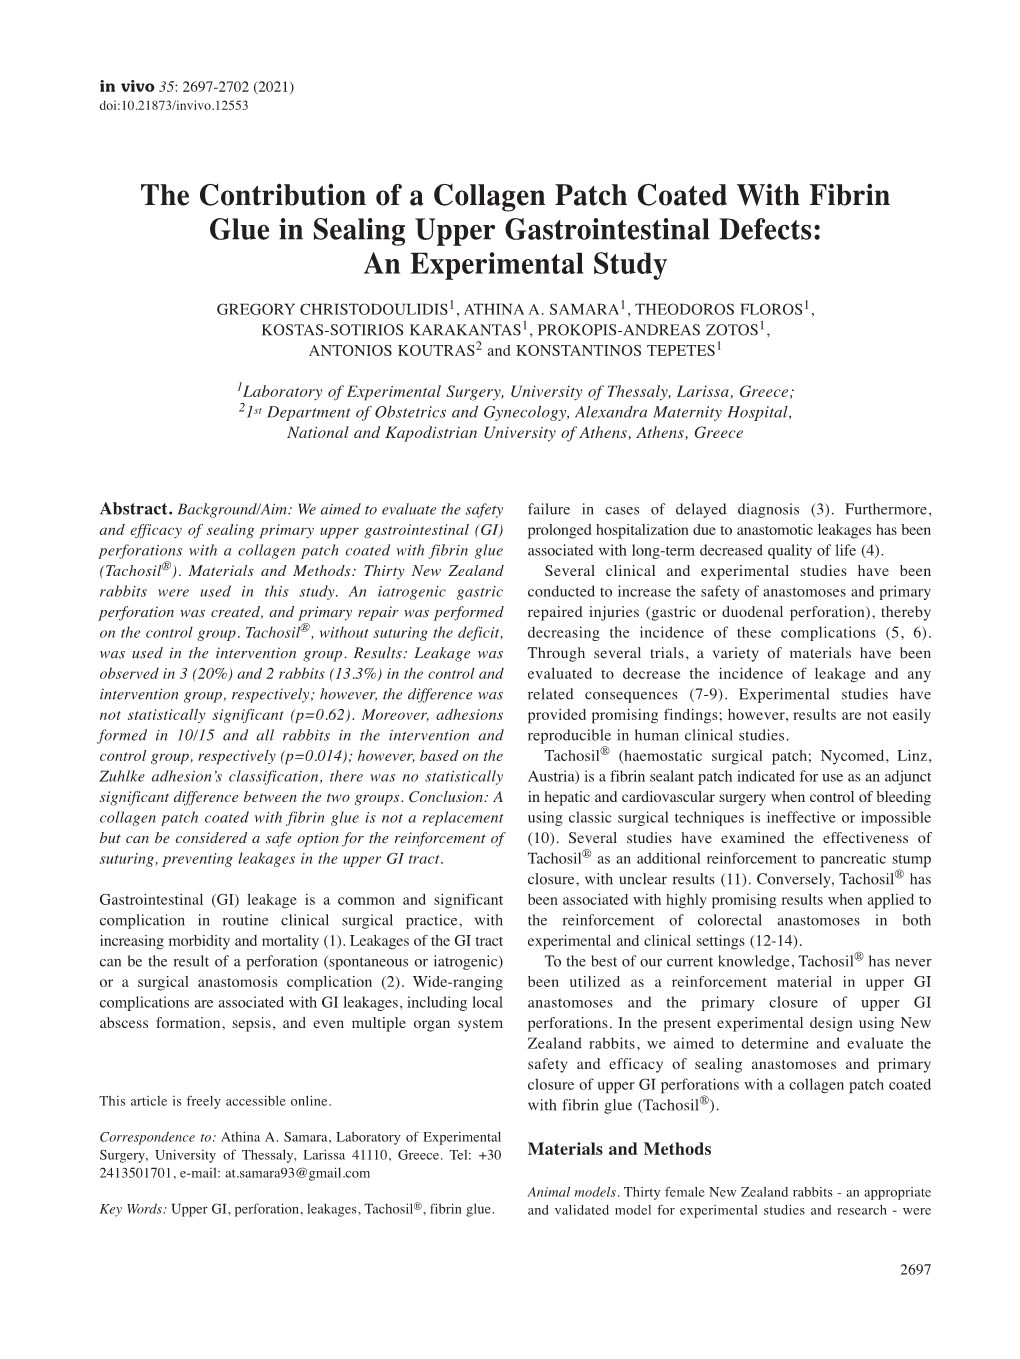 The Contribution of a Collagen Patch Coated with Fibrin Glue in Sealing Upper Gastrointestinal Defects: an Experimental Study GREGORY CHRISTODOULIDIS 1, ATHINA A